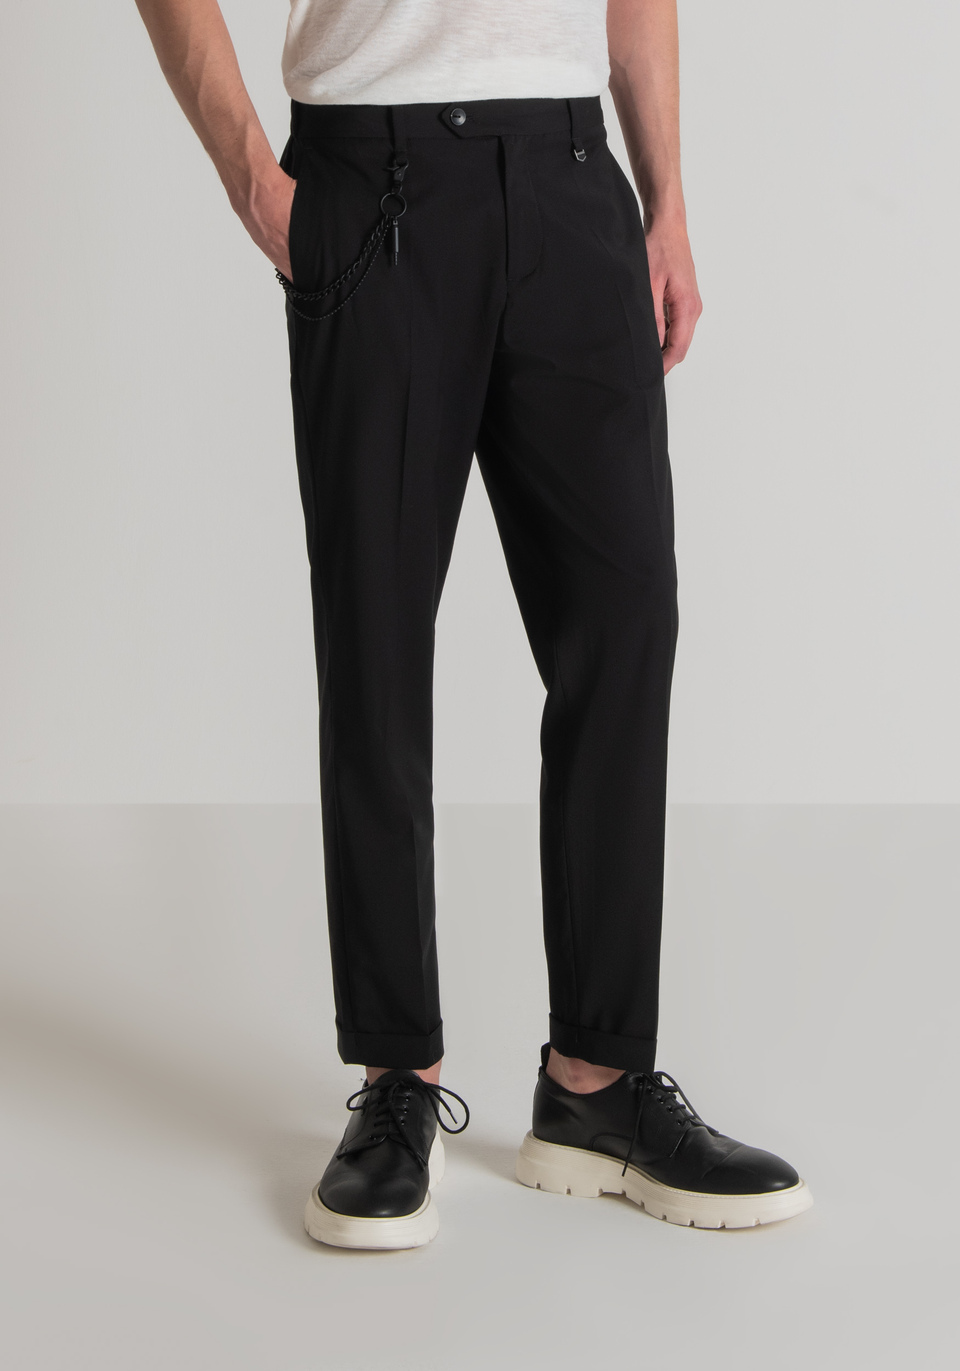 Styli Trousers and Pants  Buy Styli Black Tweed Slim Fit Ankle Length  Trouser With Frayed Edge Online  Nykaa Fashion